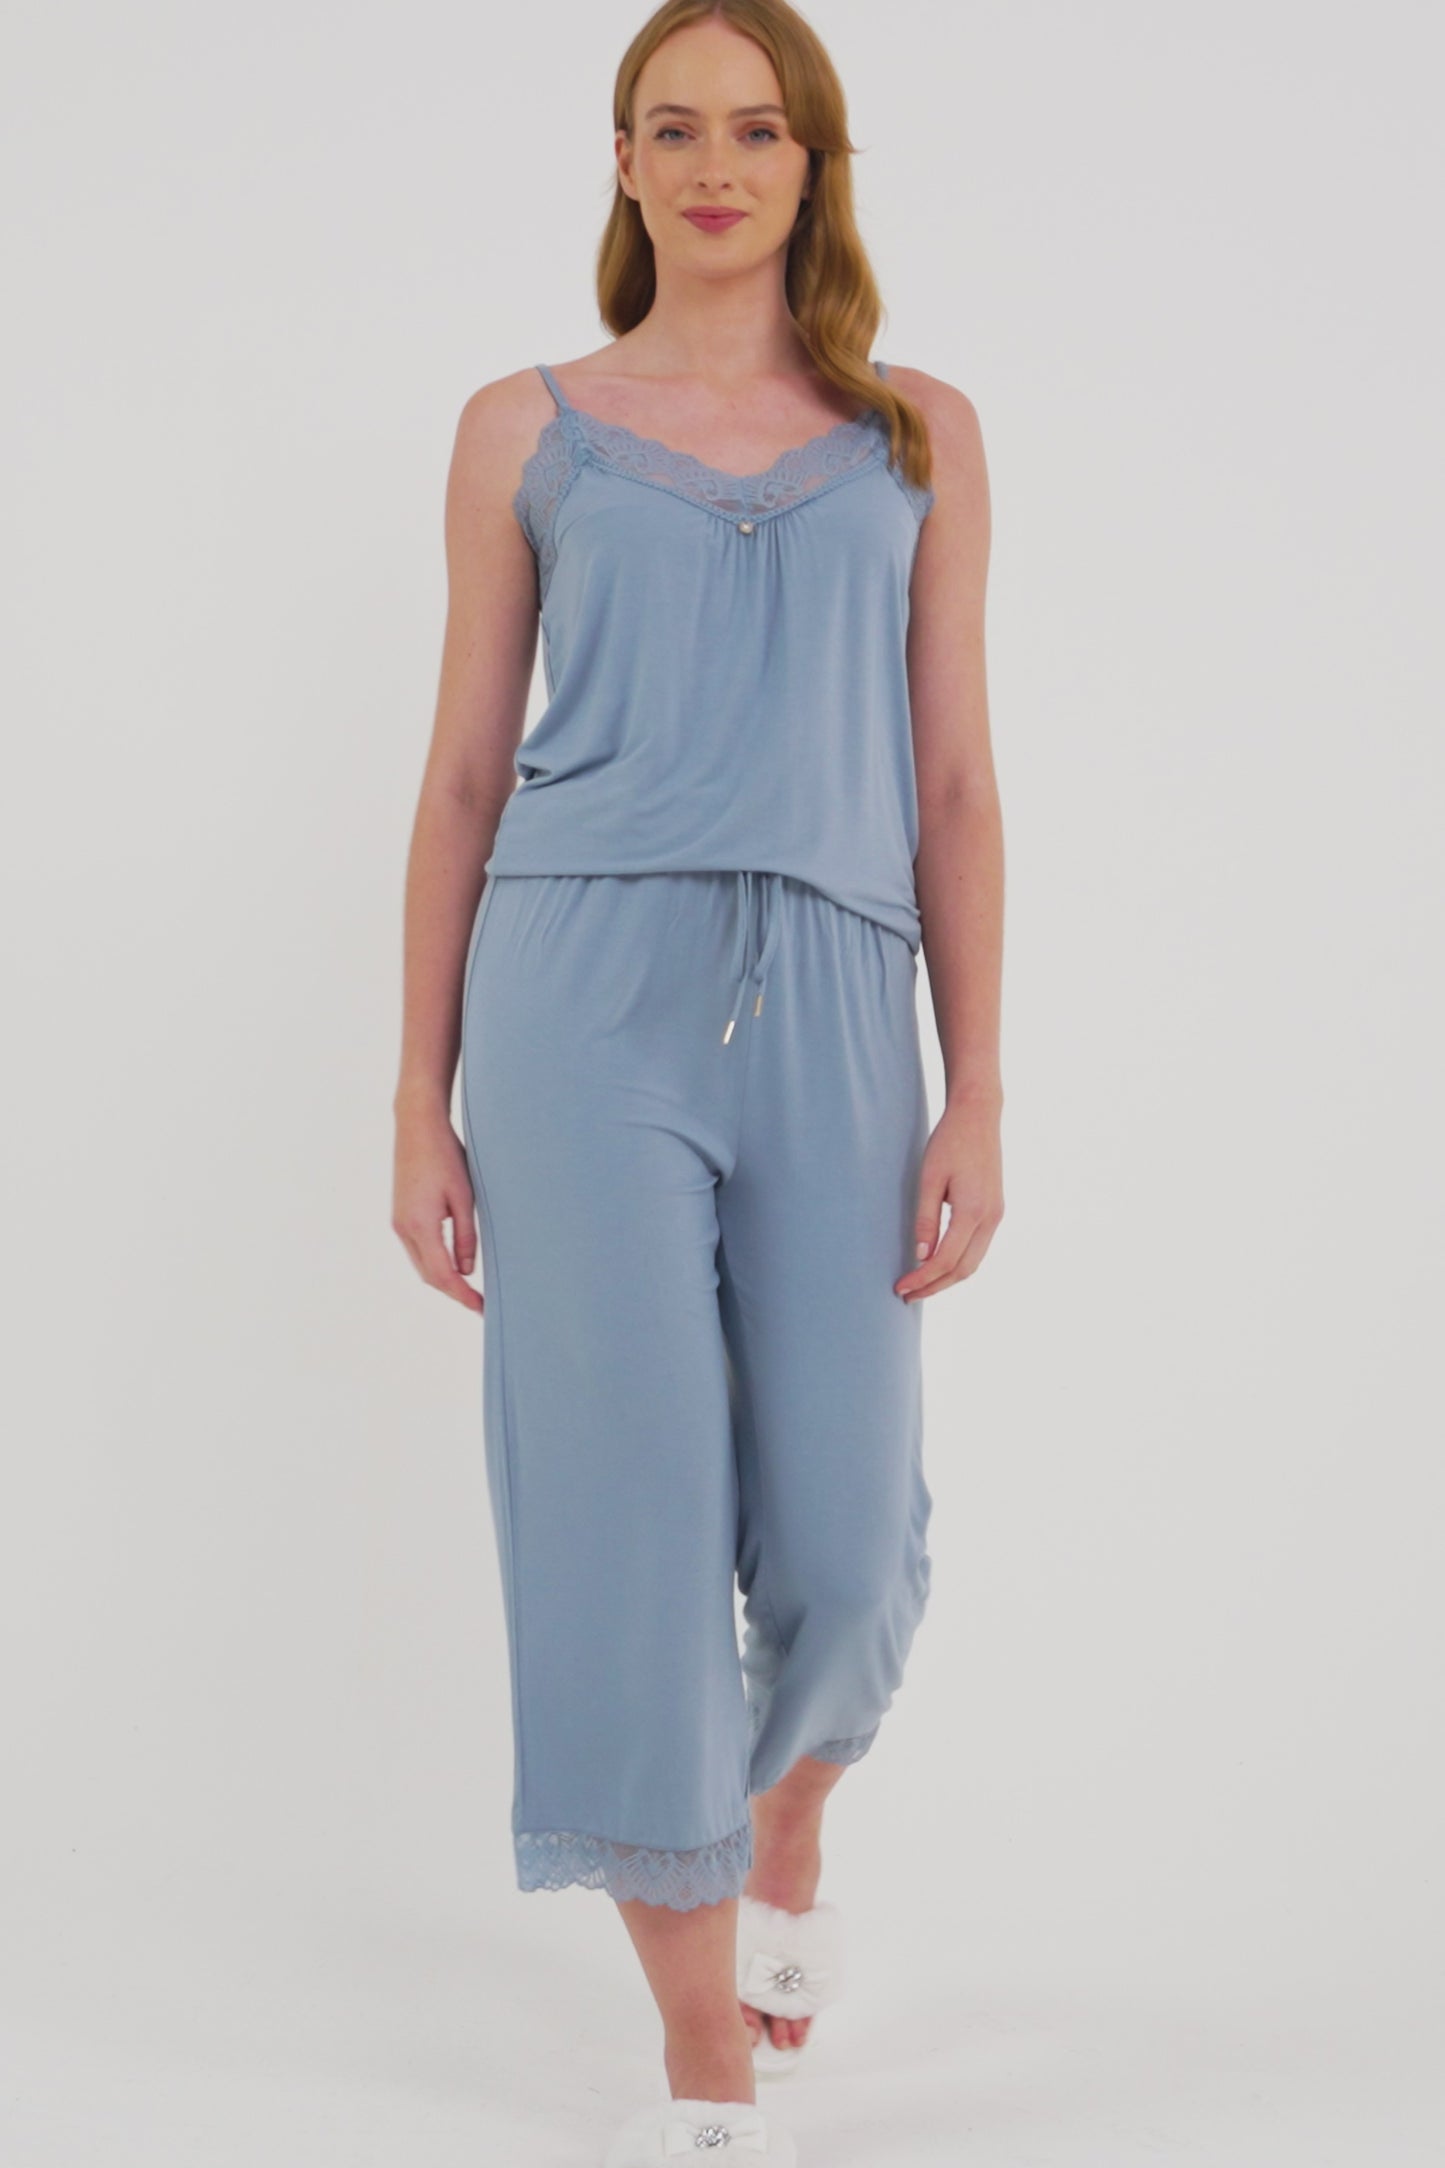 Bamboo Lace Cami Cropped Trouser Pyjama Set in Blue Mist